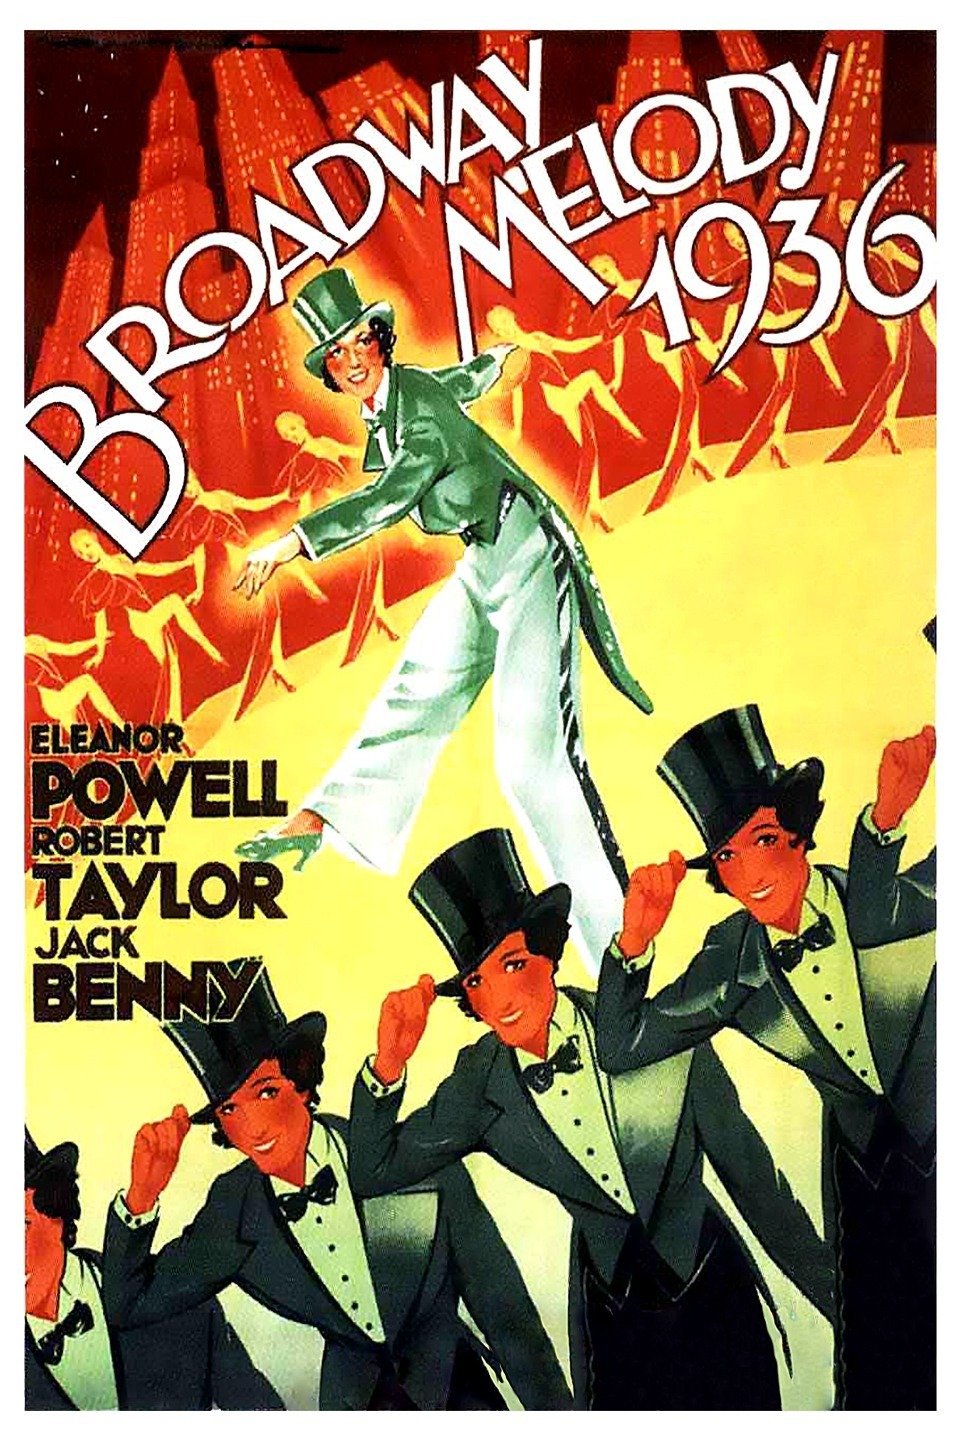 Broadway Melody of 1936 (1935) with English Subtitles on DVD on DVD